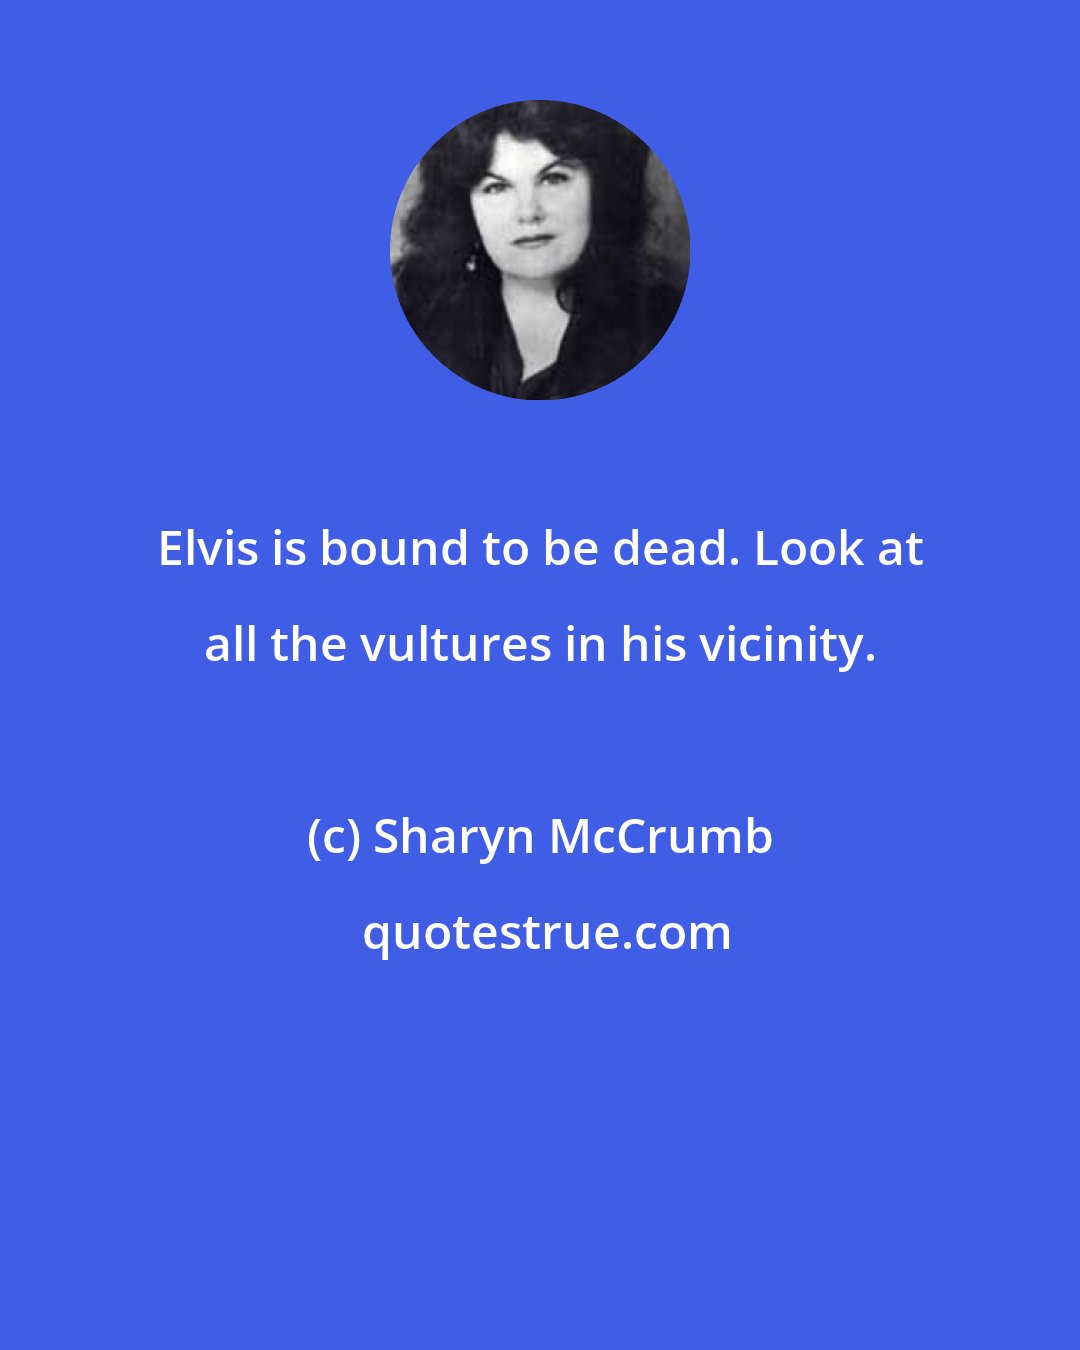 Sharyn McCrumb: Elvis is bound to be dead. Look at all the vultures in his vicinity.